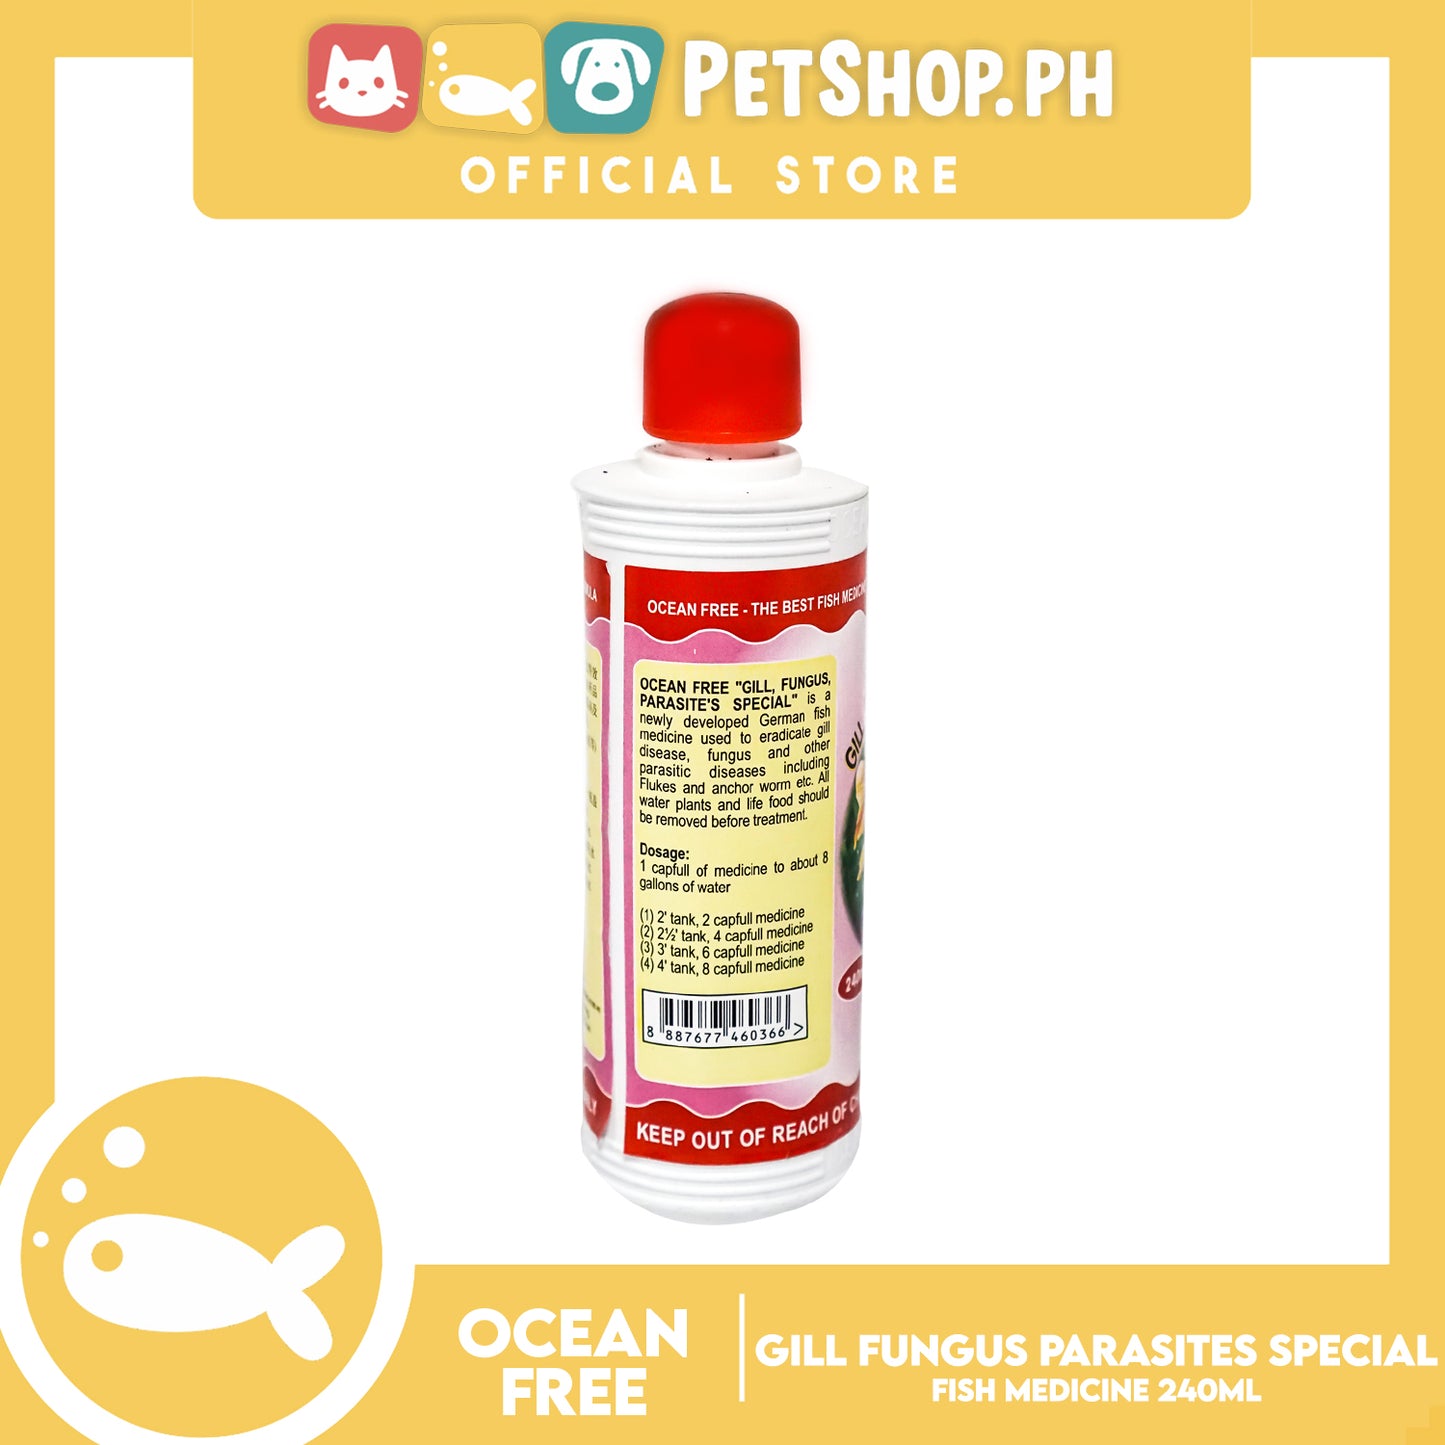 Ocean Free The Best Fish Medicine 240ml (Gill, Fungus, Parasite's Special)